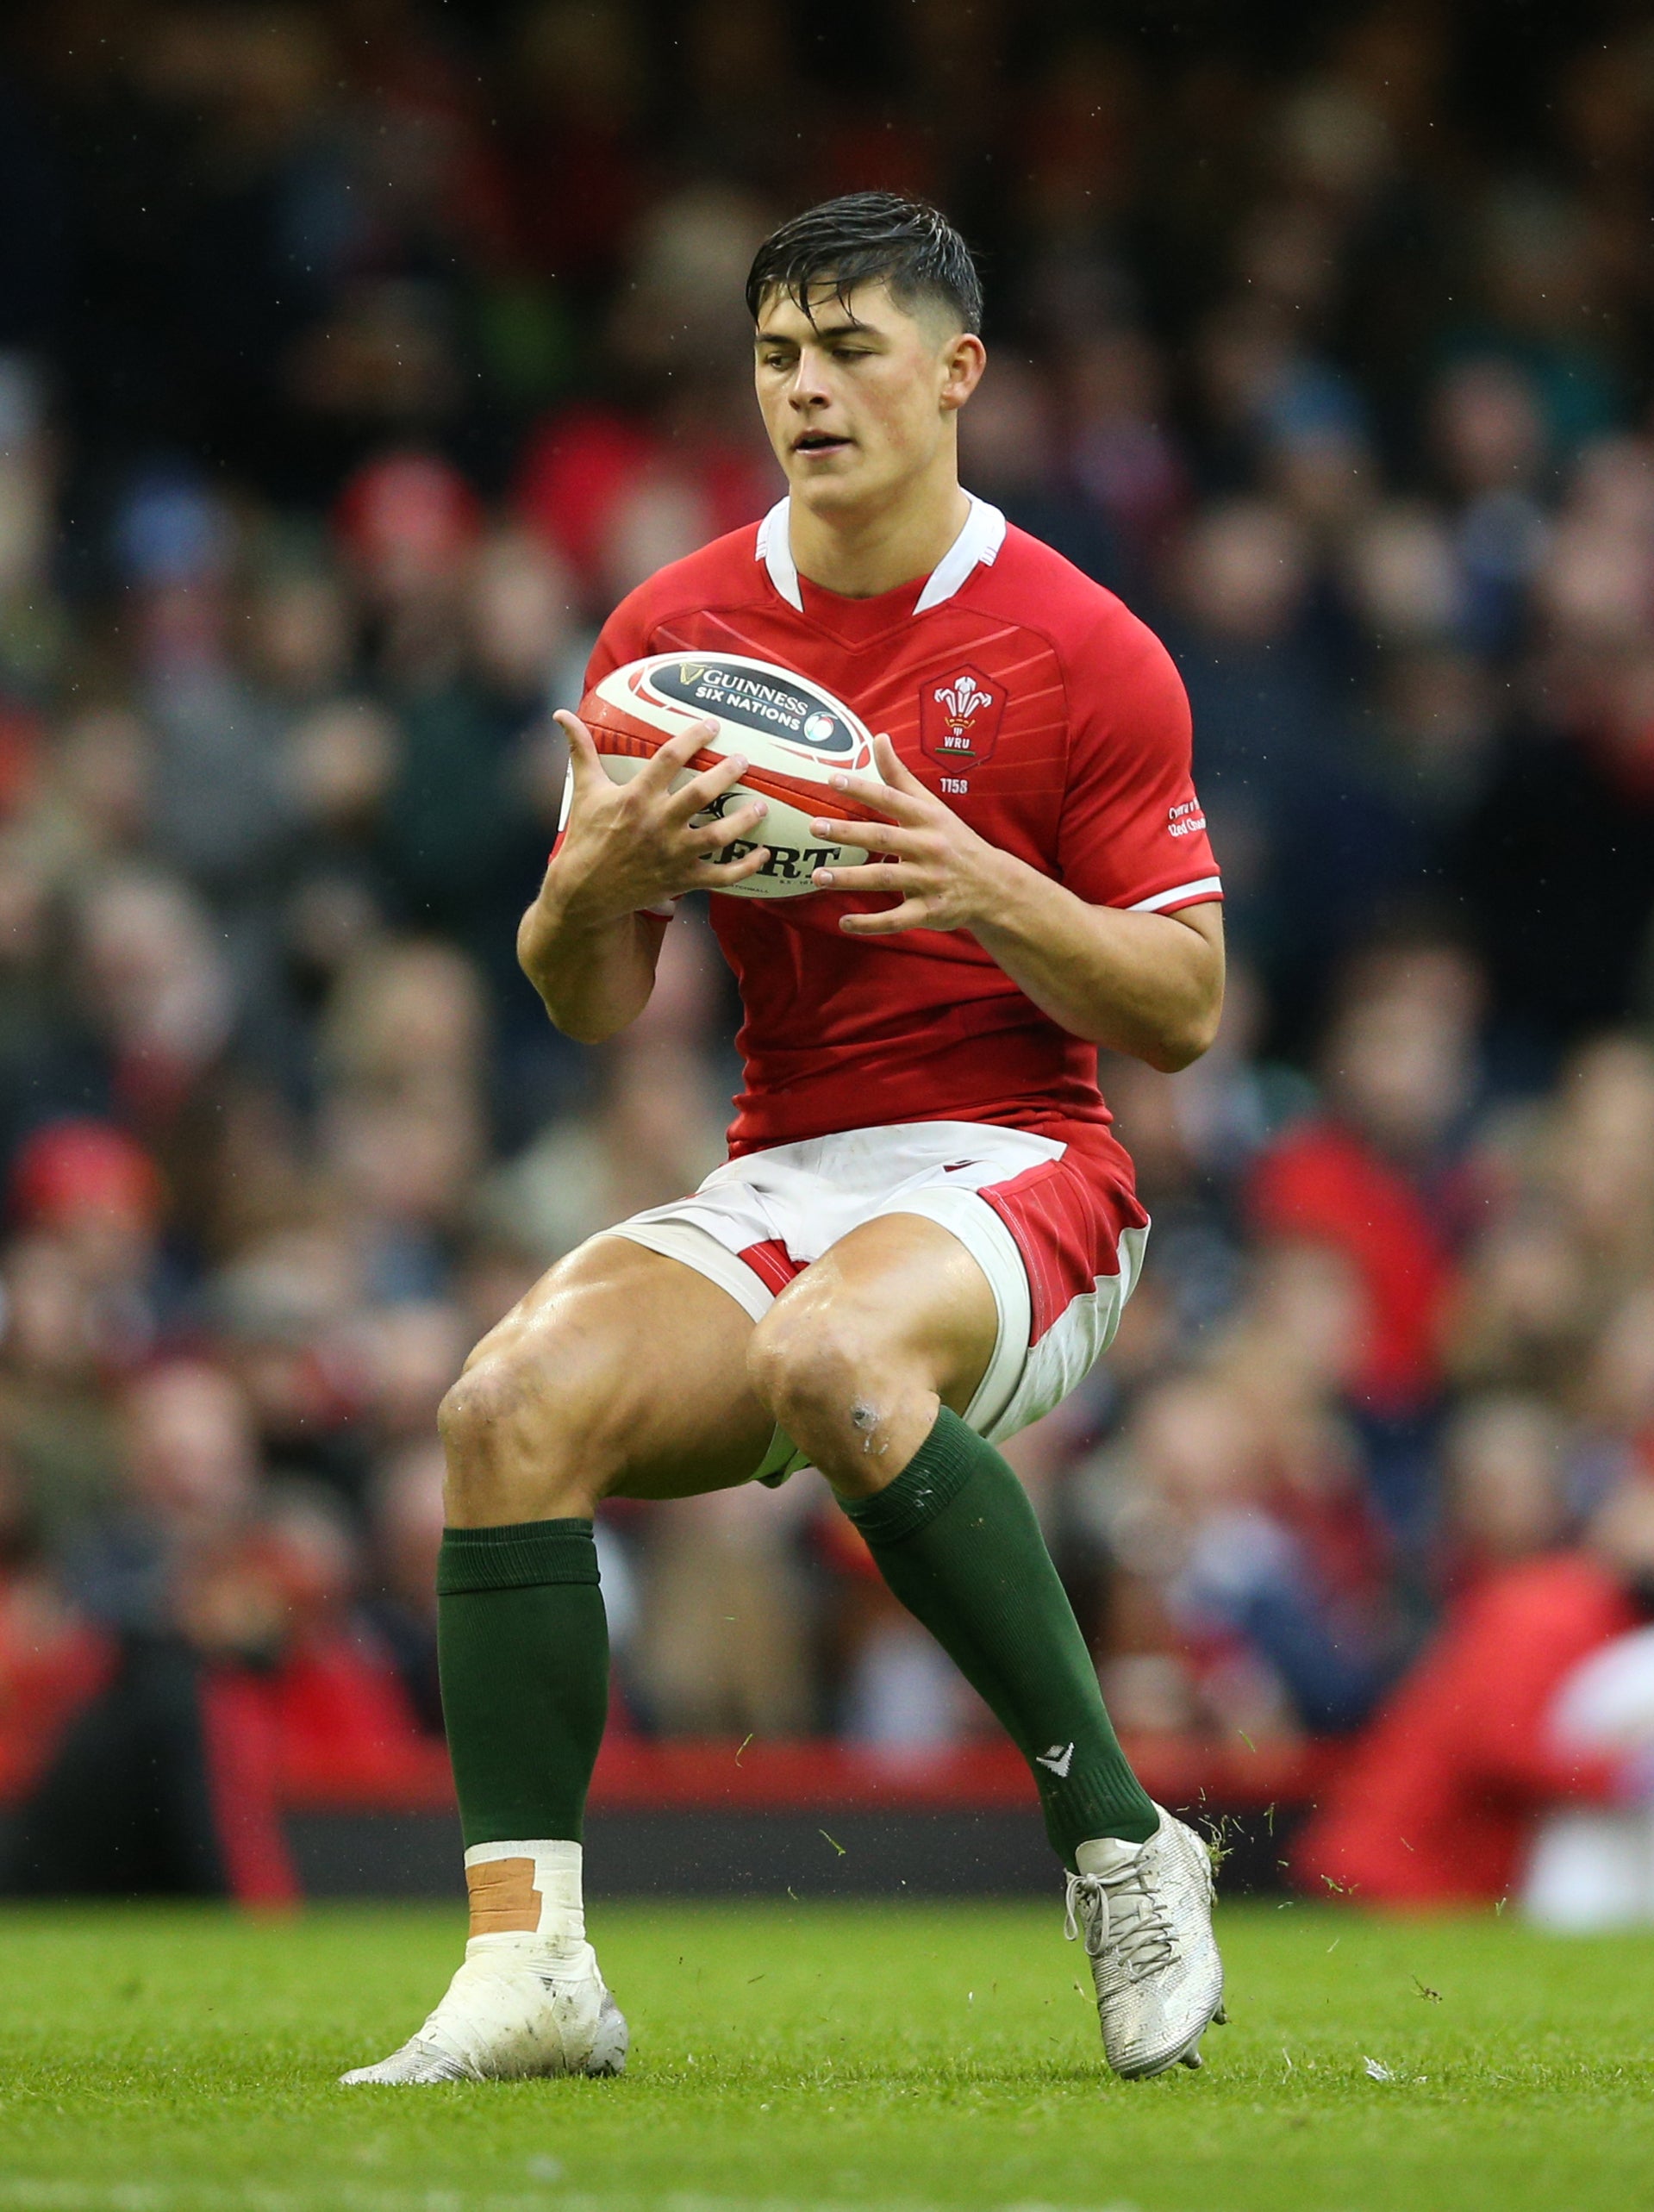 Louis Rees-Zammit has been left out of the Wales team to face England (Nigel French/PA)